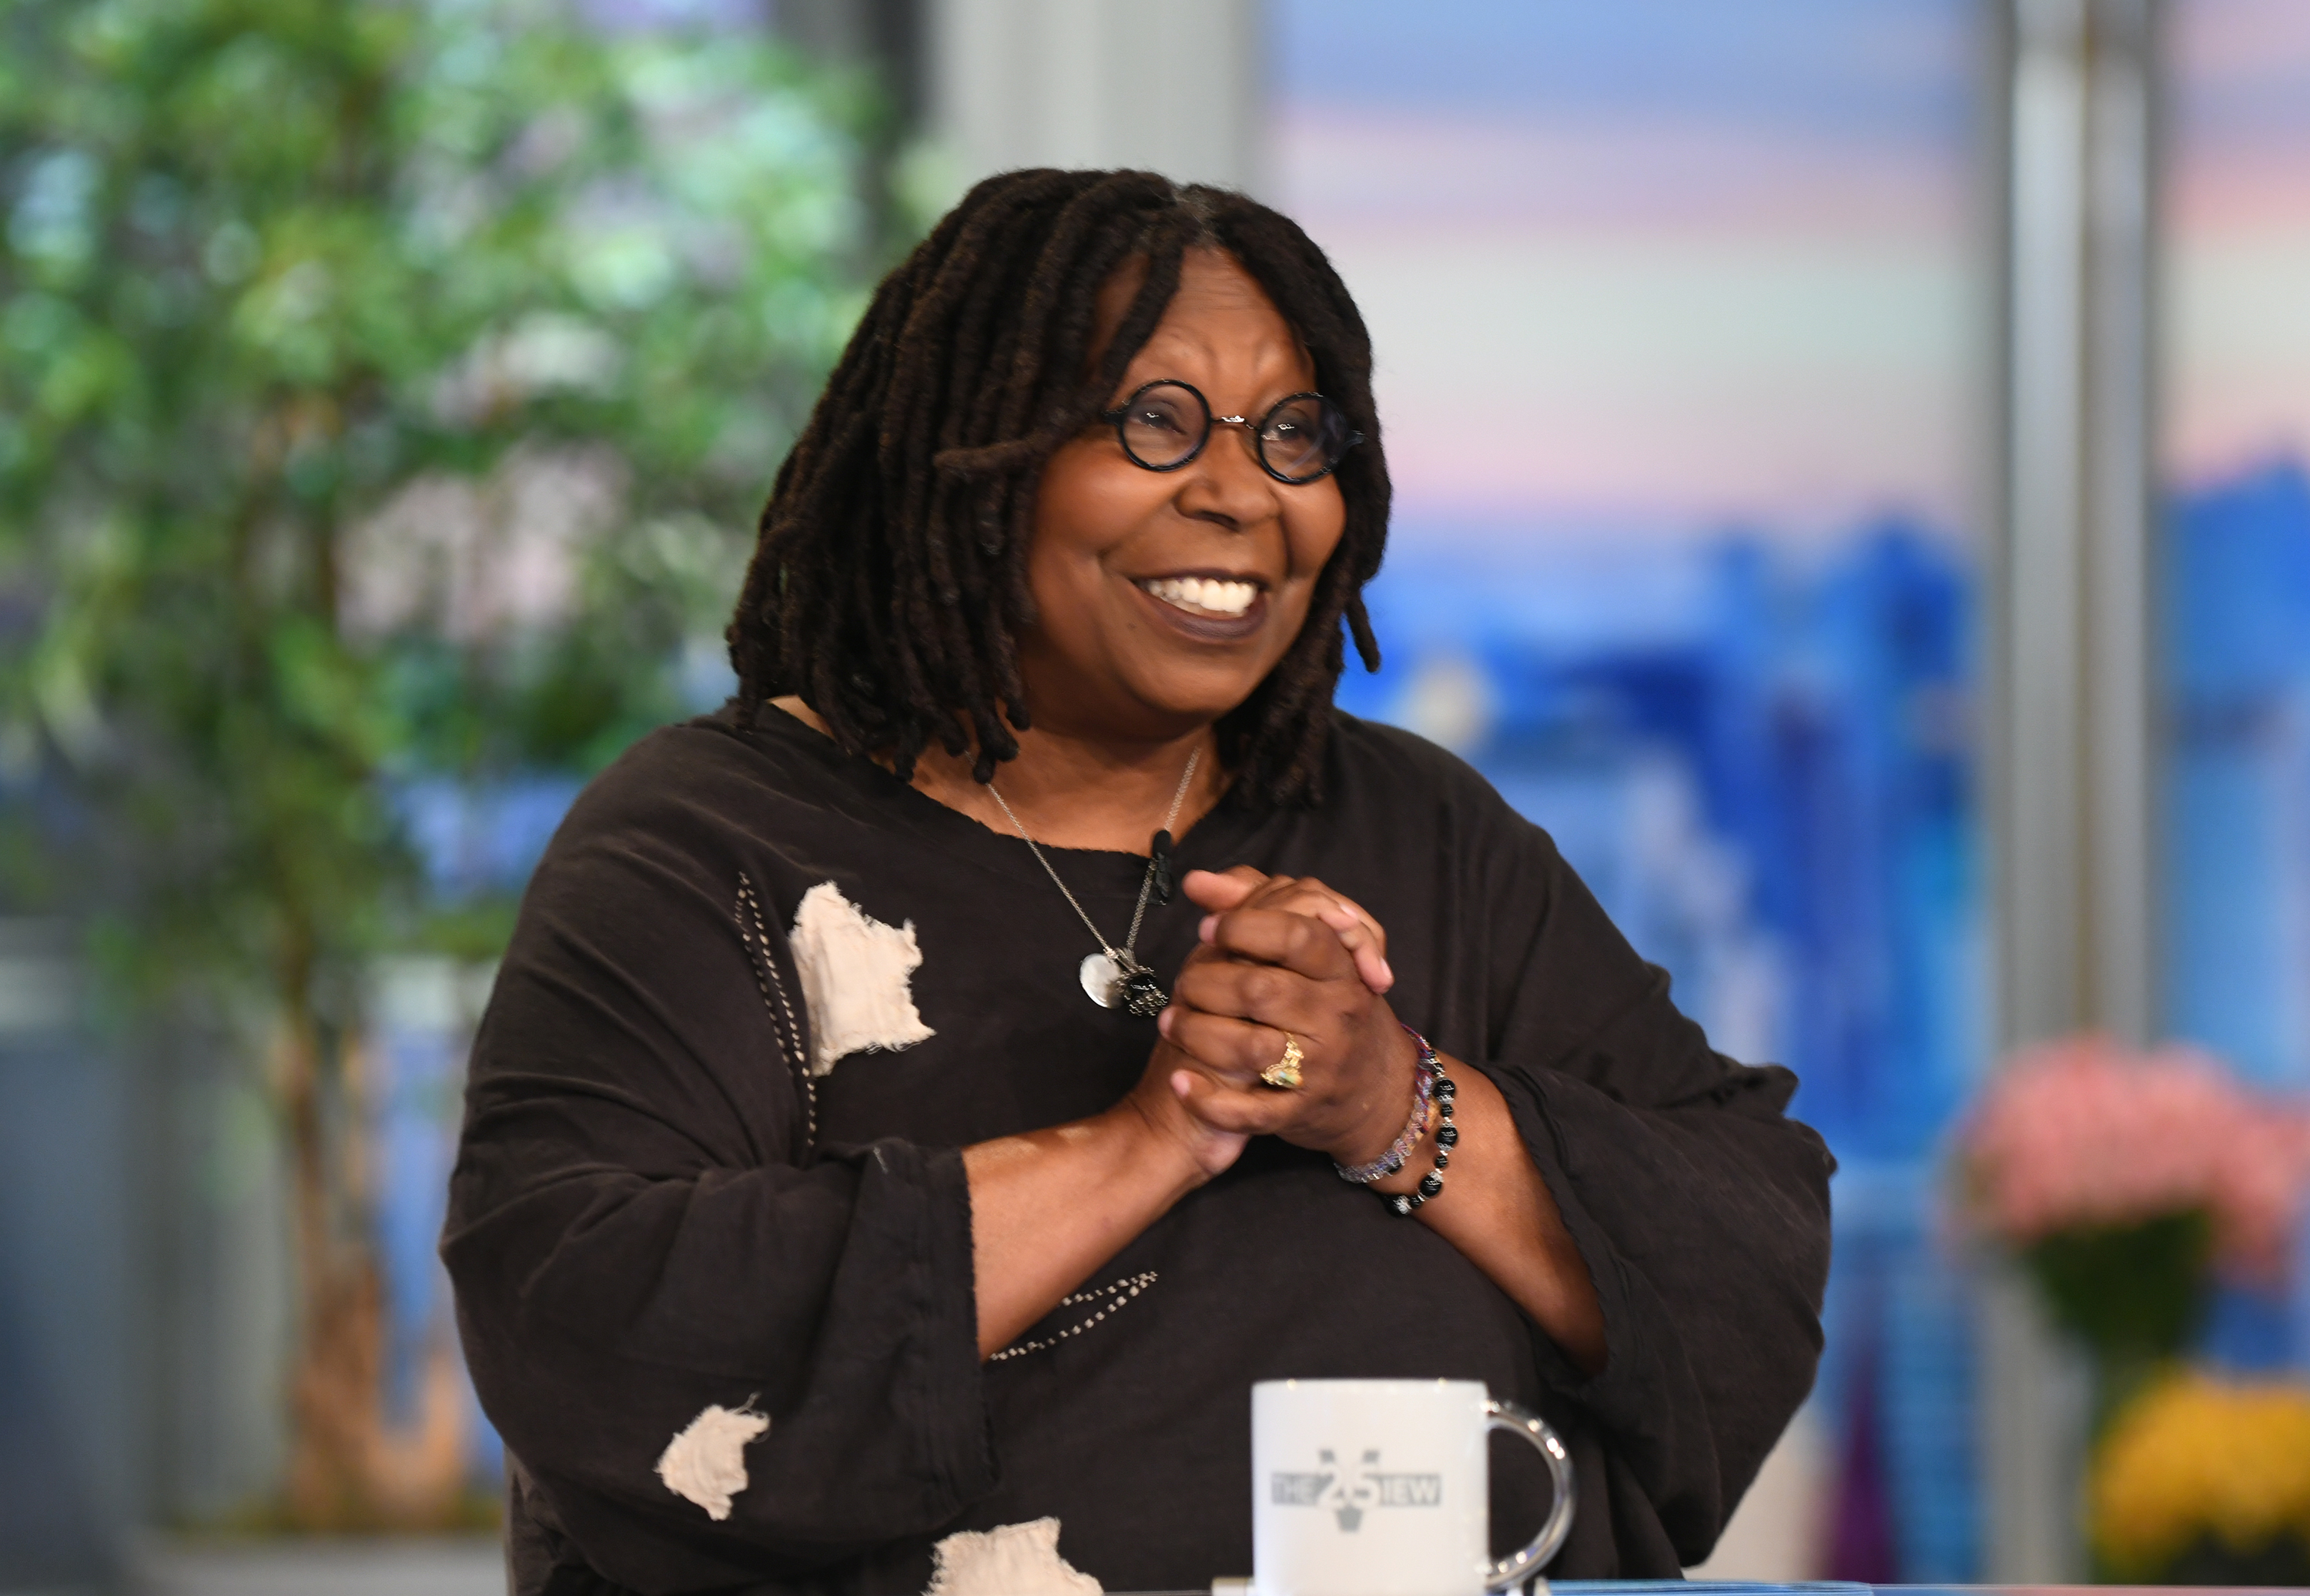 Whoopi Goldberg during an episode of "The View" on September 14, 2021. | Source: Getty Images